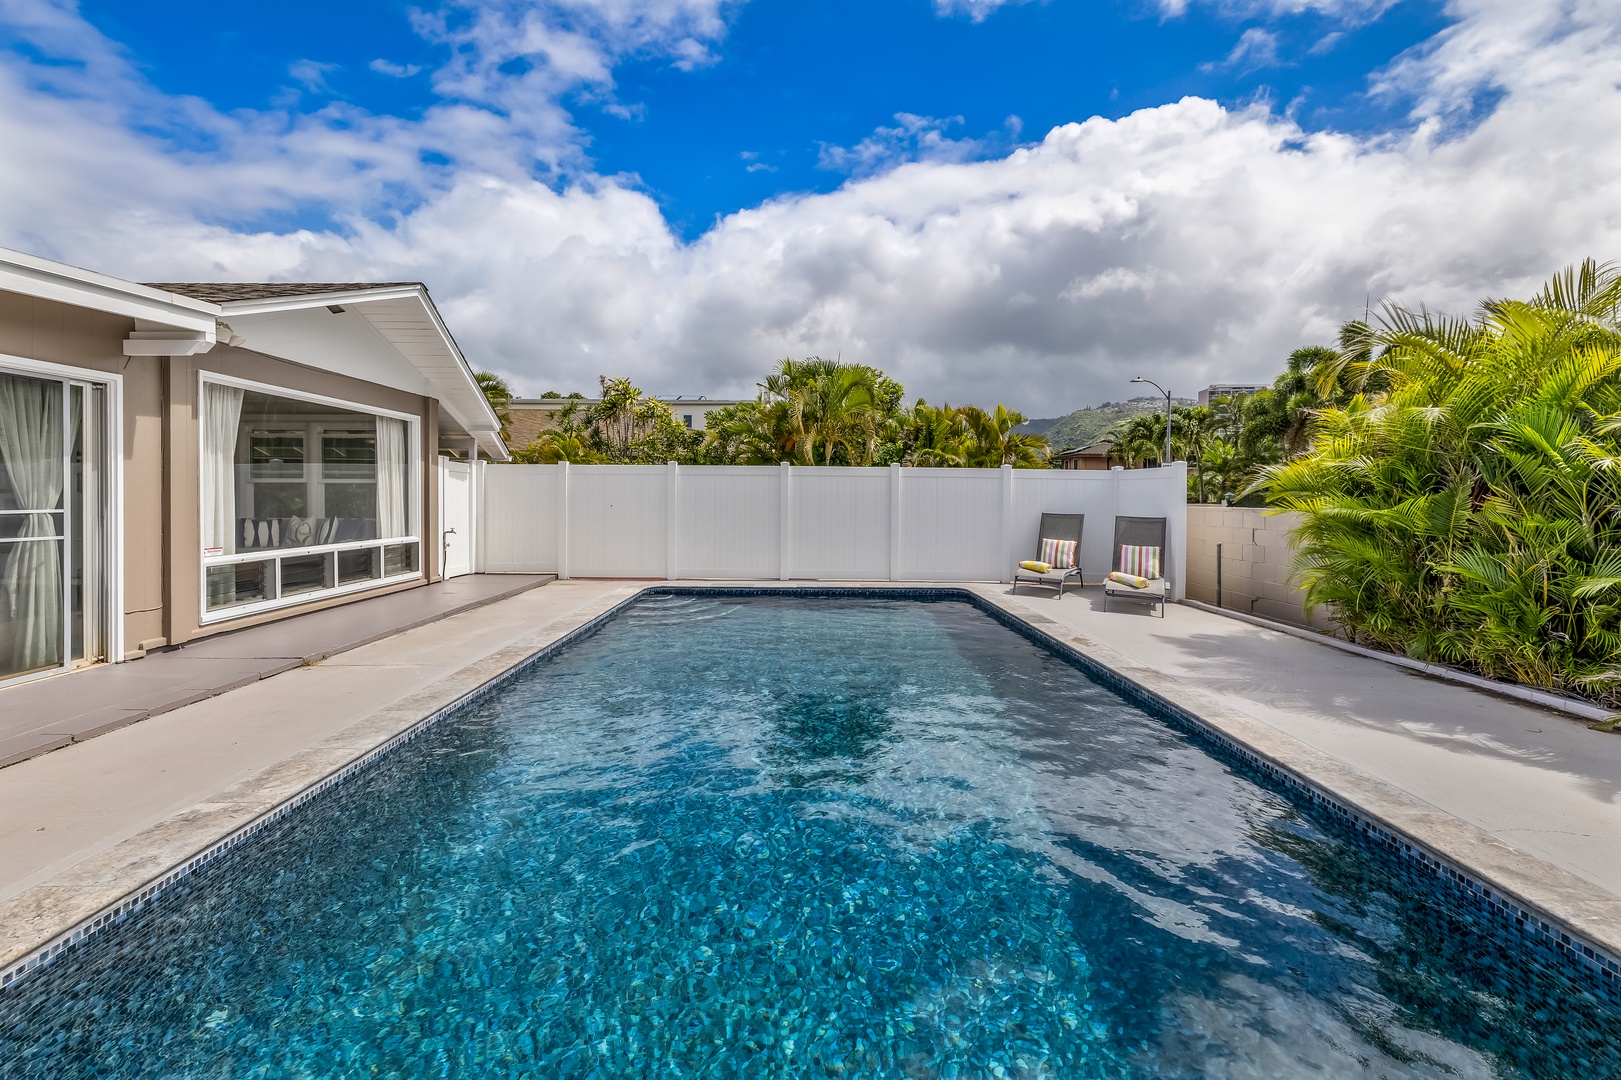 Honolulu Vacation Rentals, Kahala Cottage - Your pool has fencing all around creating privacy.